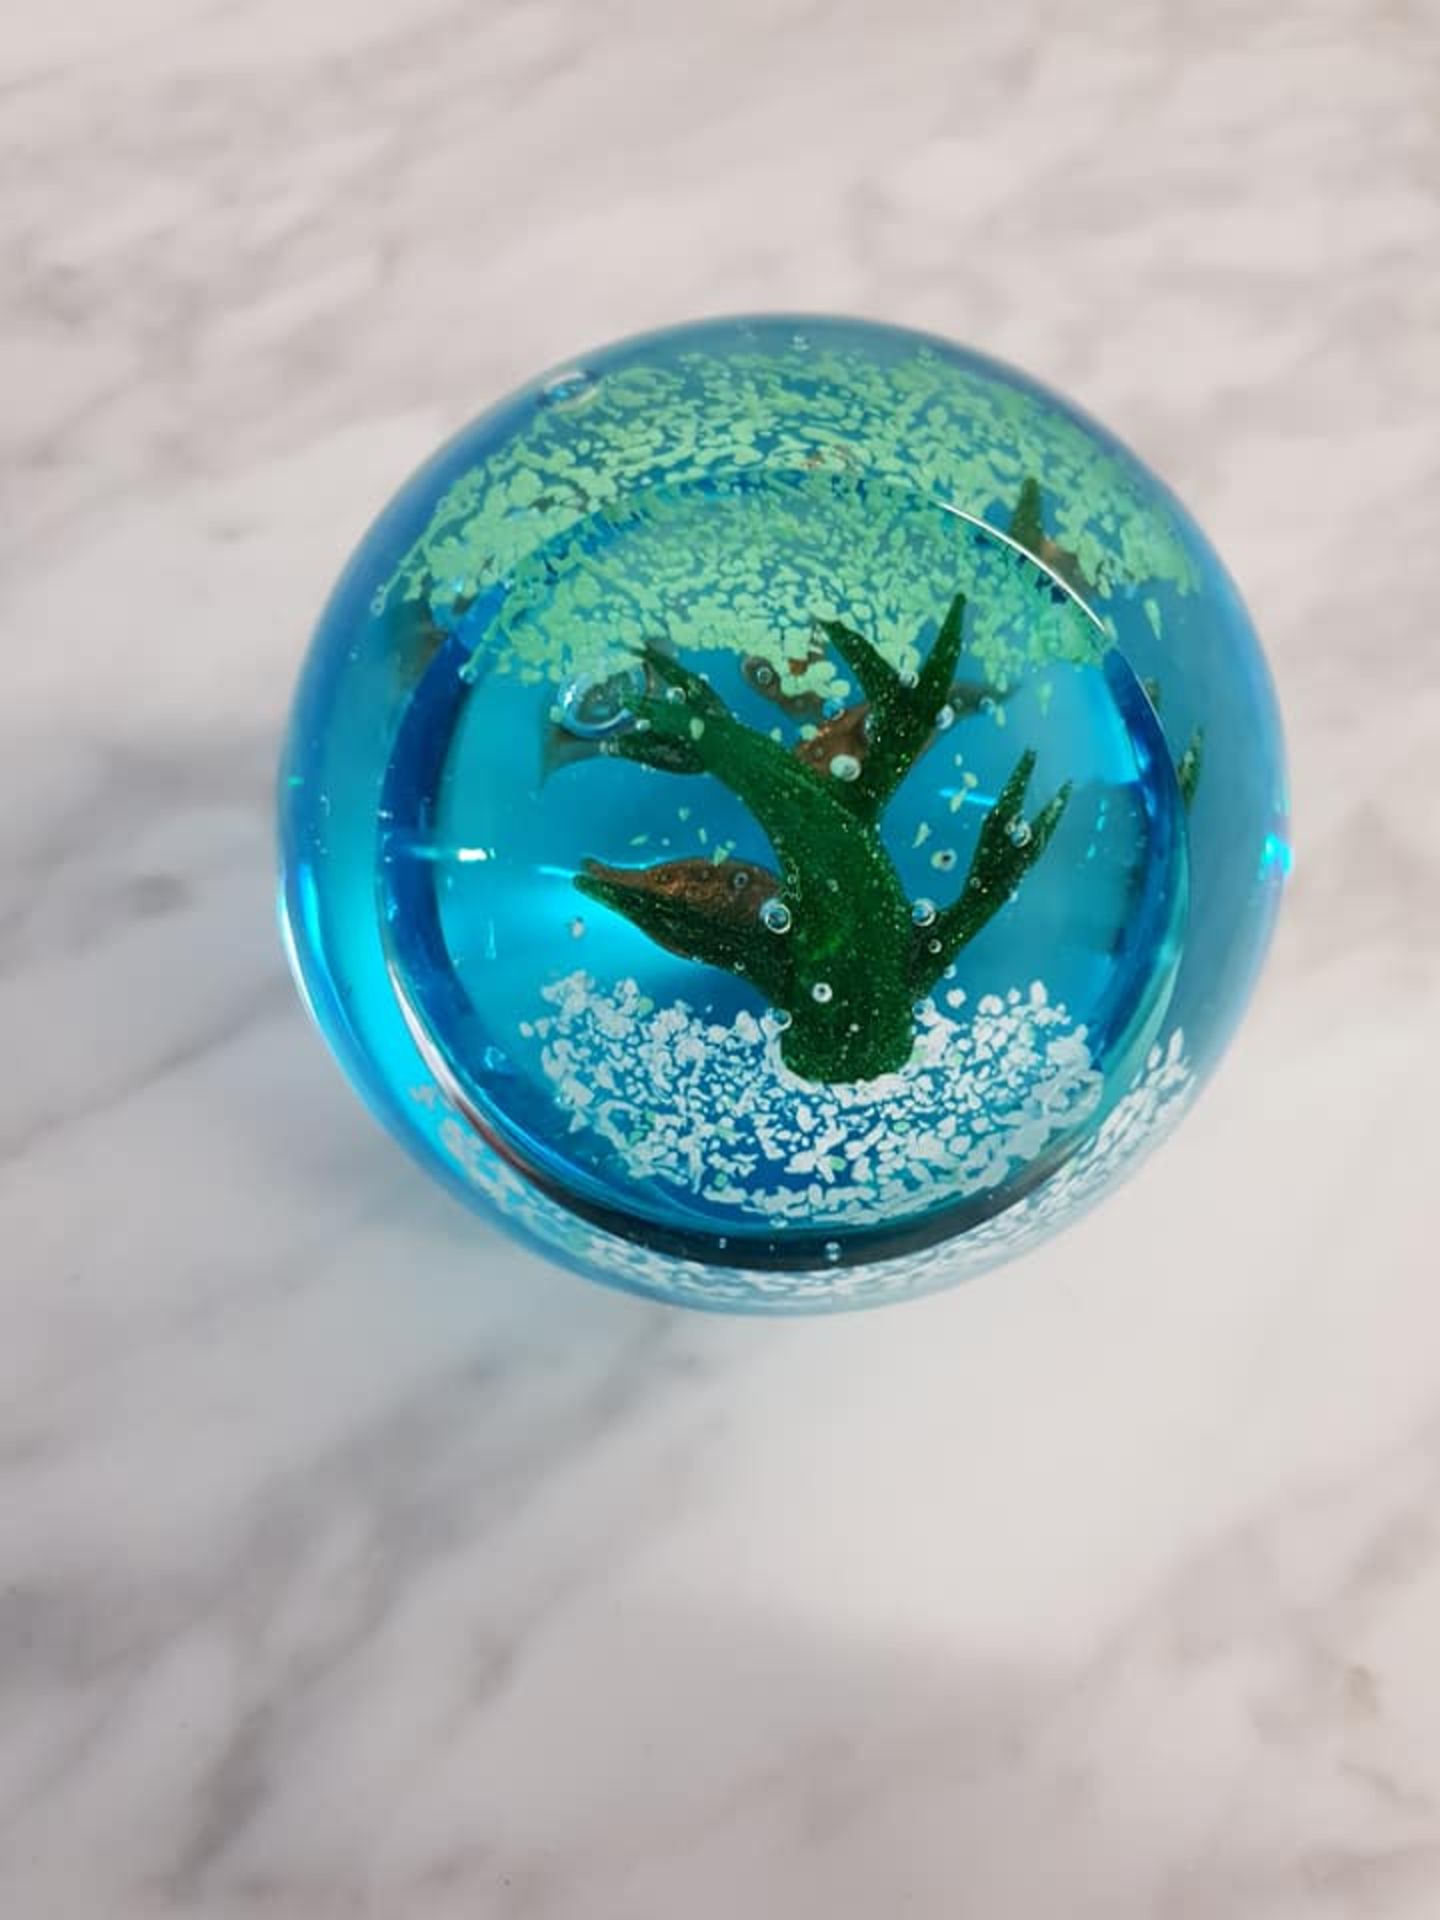 Bohemian blown art glass sphere paperweight 9cm light blu egreen and white with sea plant design